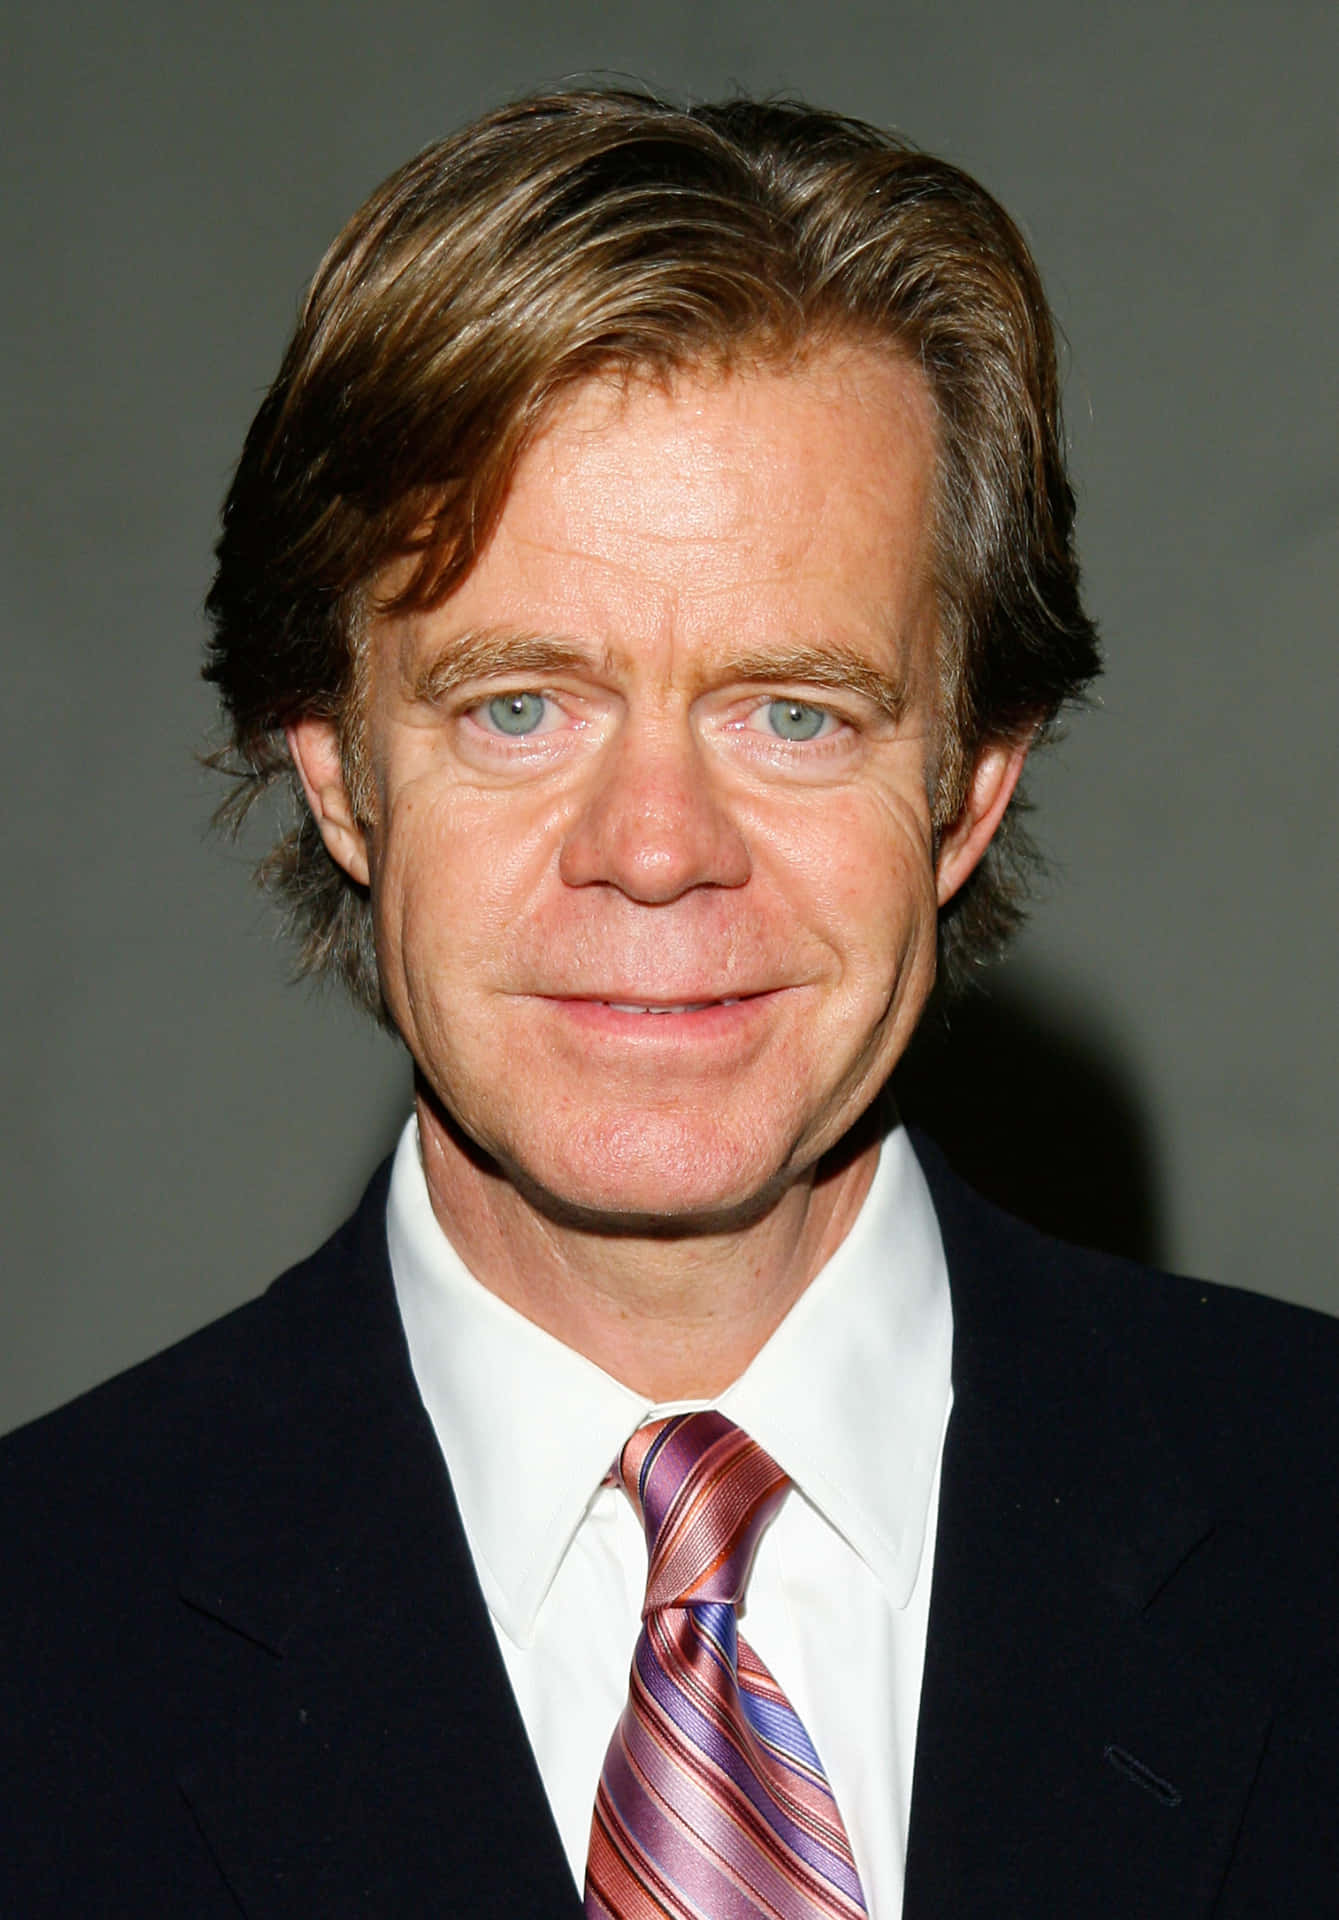 Emmy-nominated Actor William H. Macy Poses For A Portrait. Background